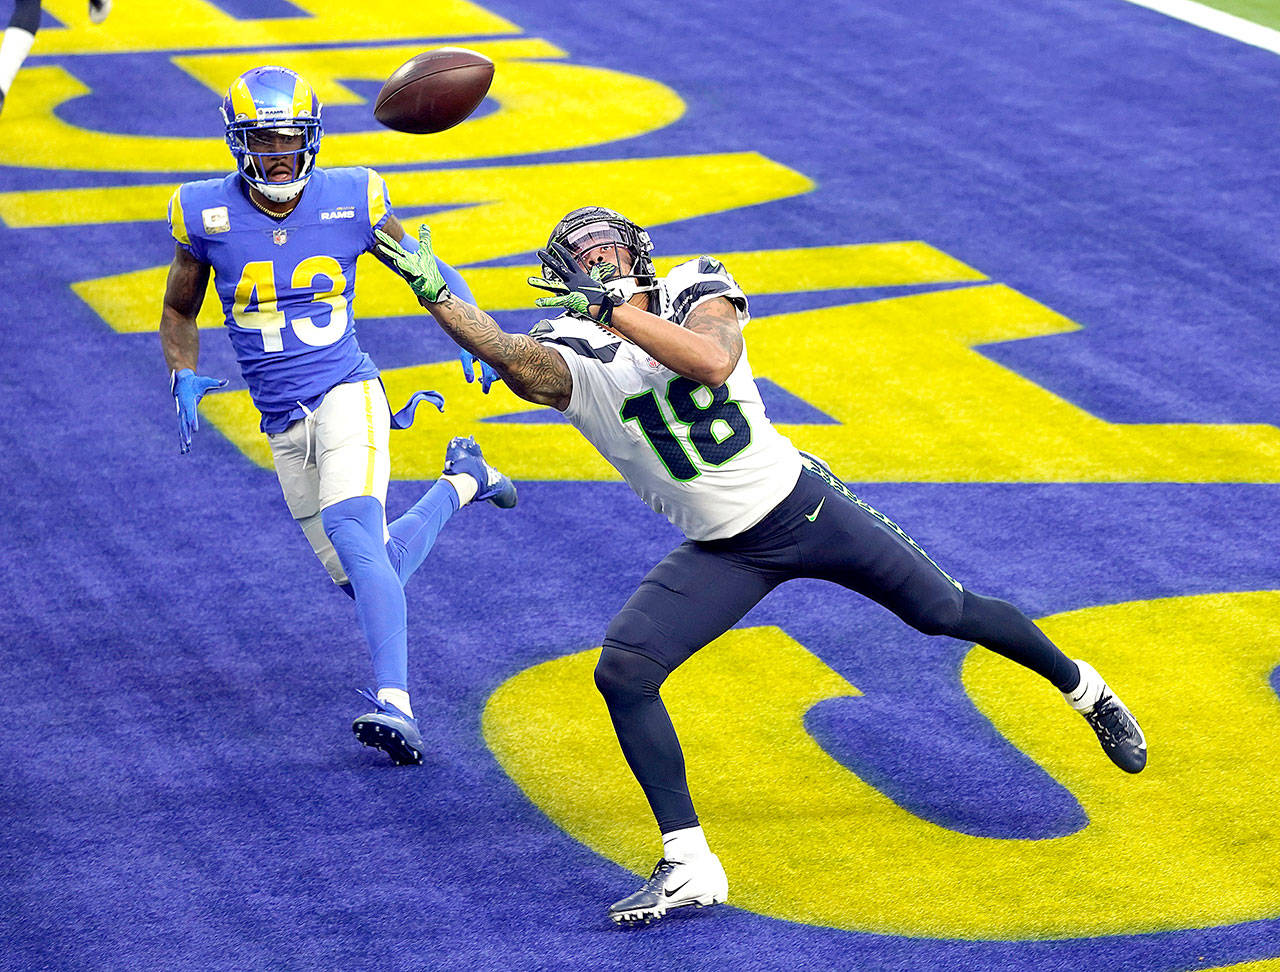 Seattle Seahawks wide receiver Freddie Swain reaches but can’t catch a pass in the end zone Sunday during the first half against Rams’ defender John Johnson III in Inglewood, Calif. (Ashley Landis/The Associated Press)